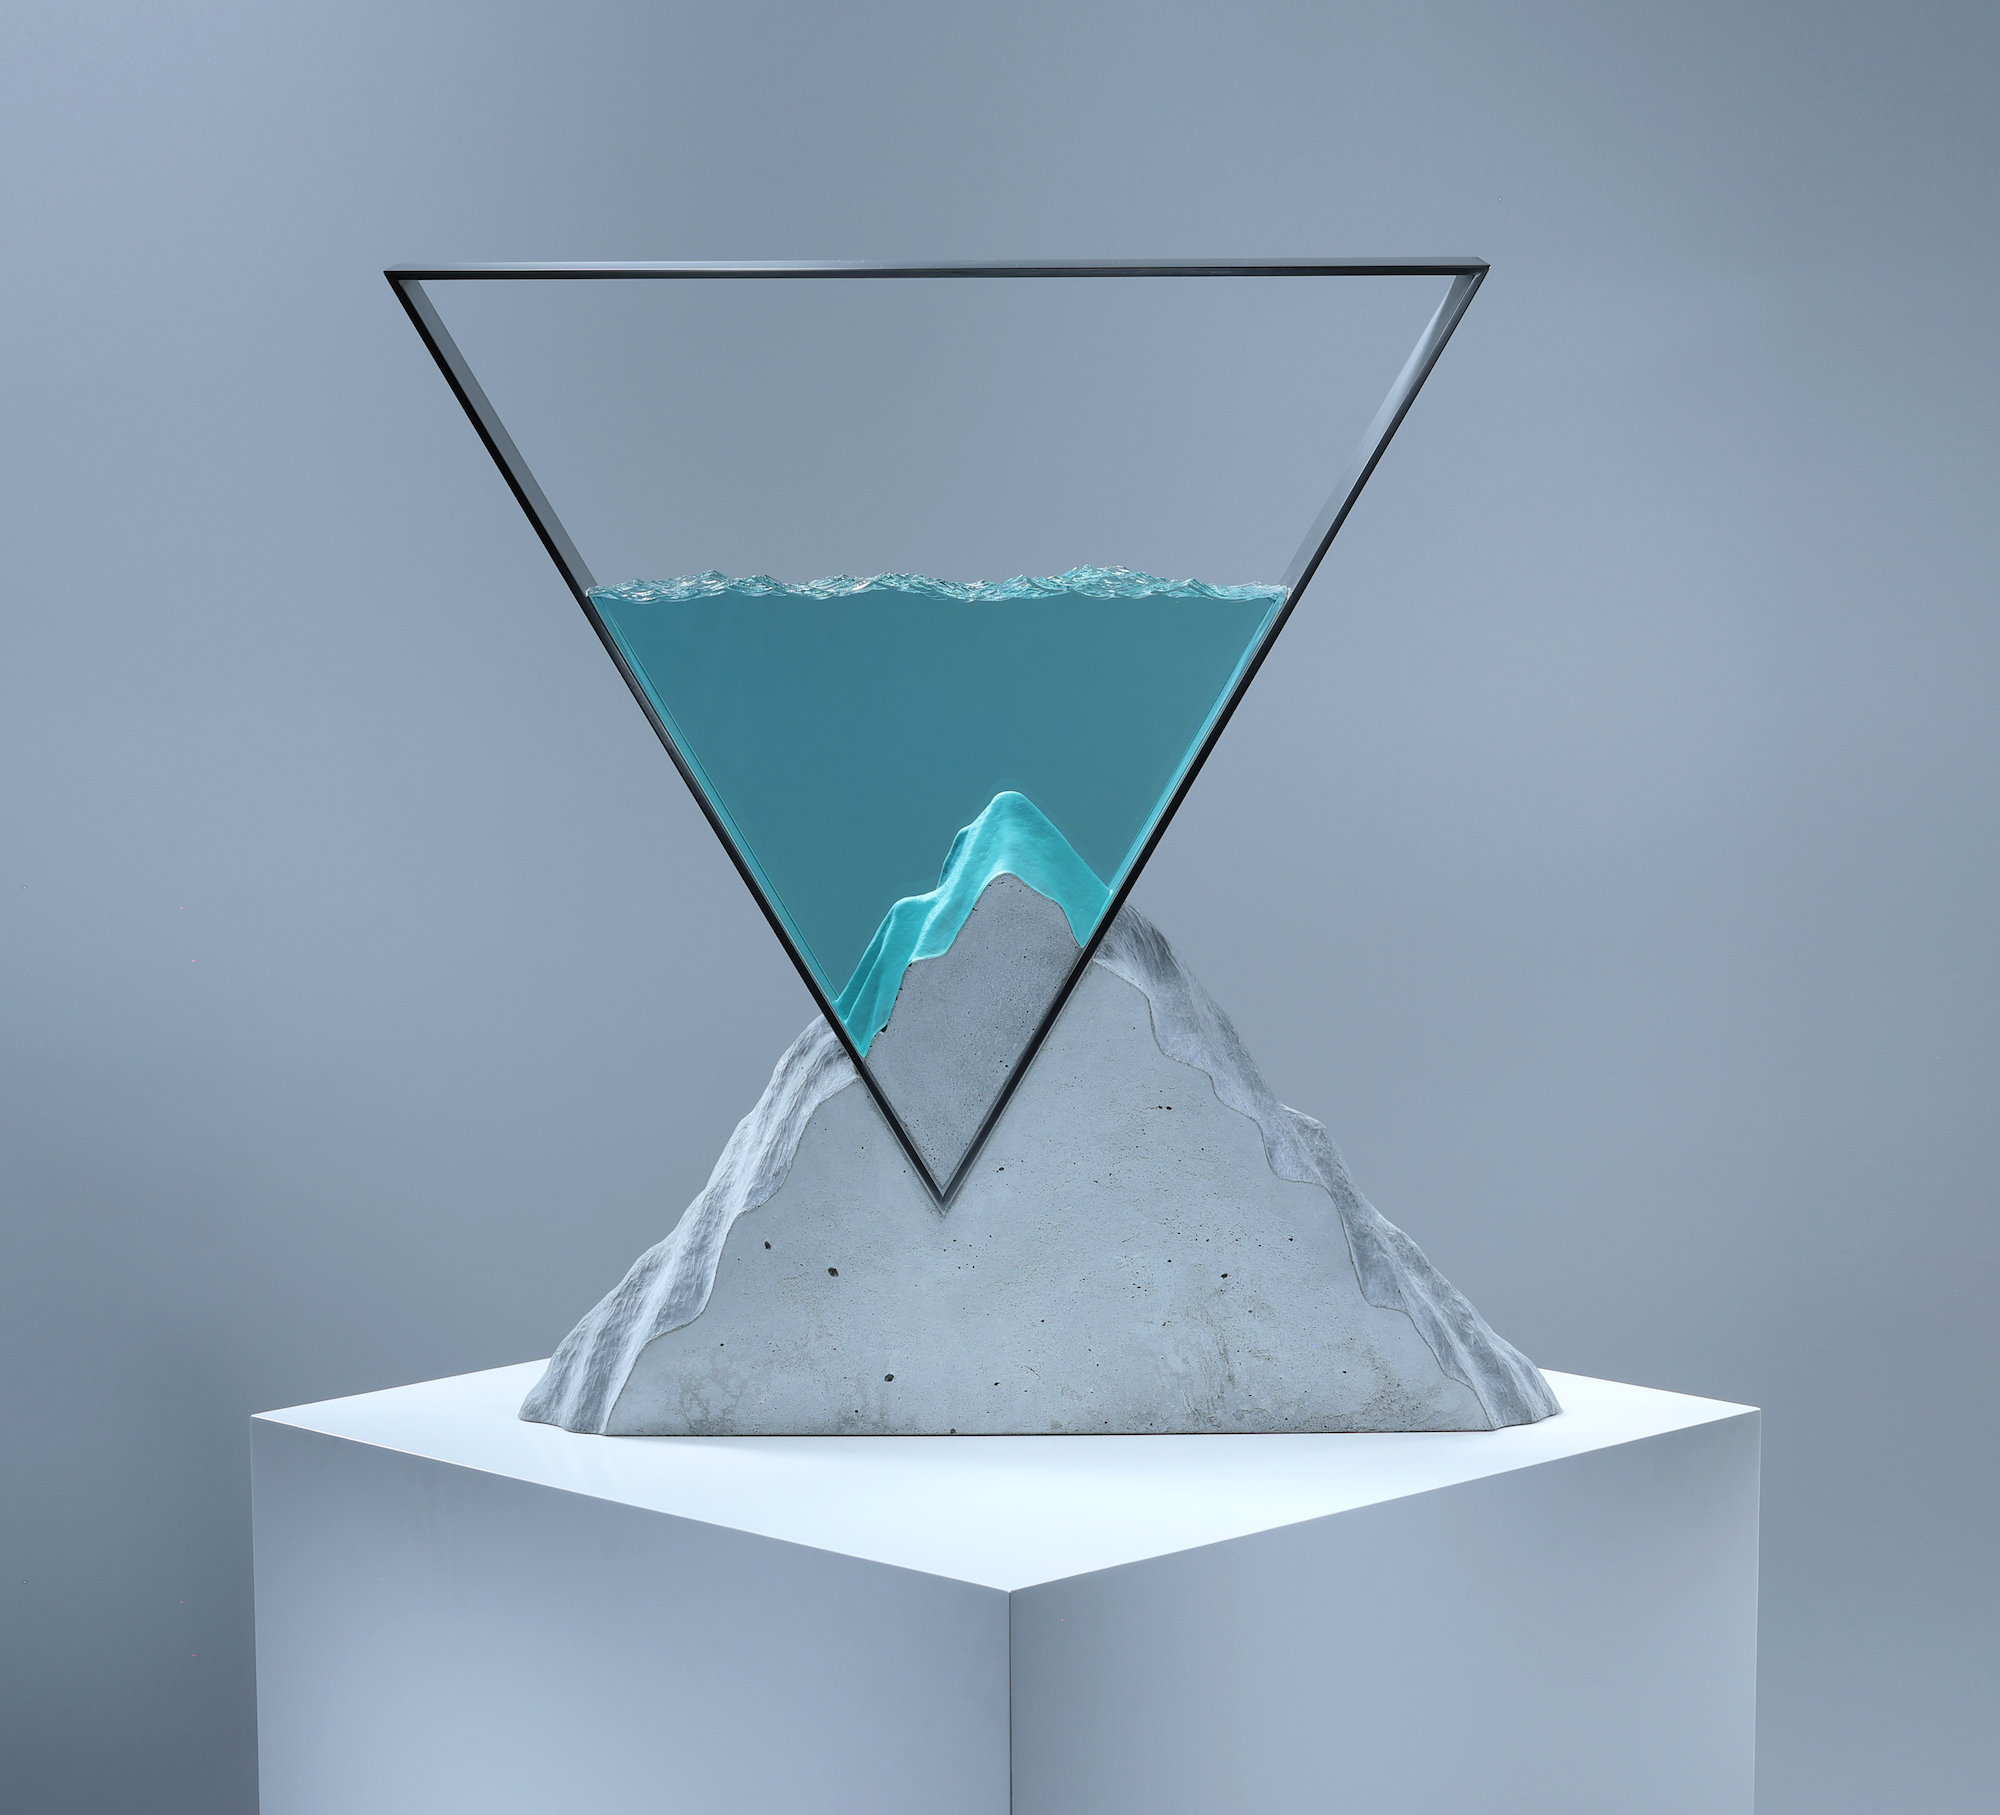 A triangular metal frame containing layers of glass resembling water, which is inverted into a triangular slab of concrete that resembles a mountain.